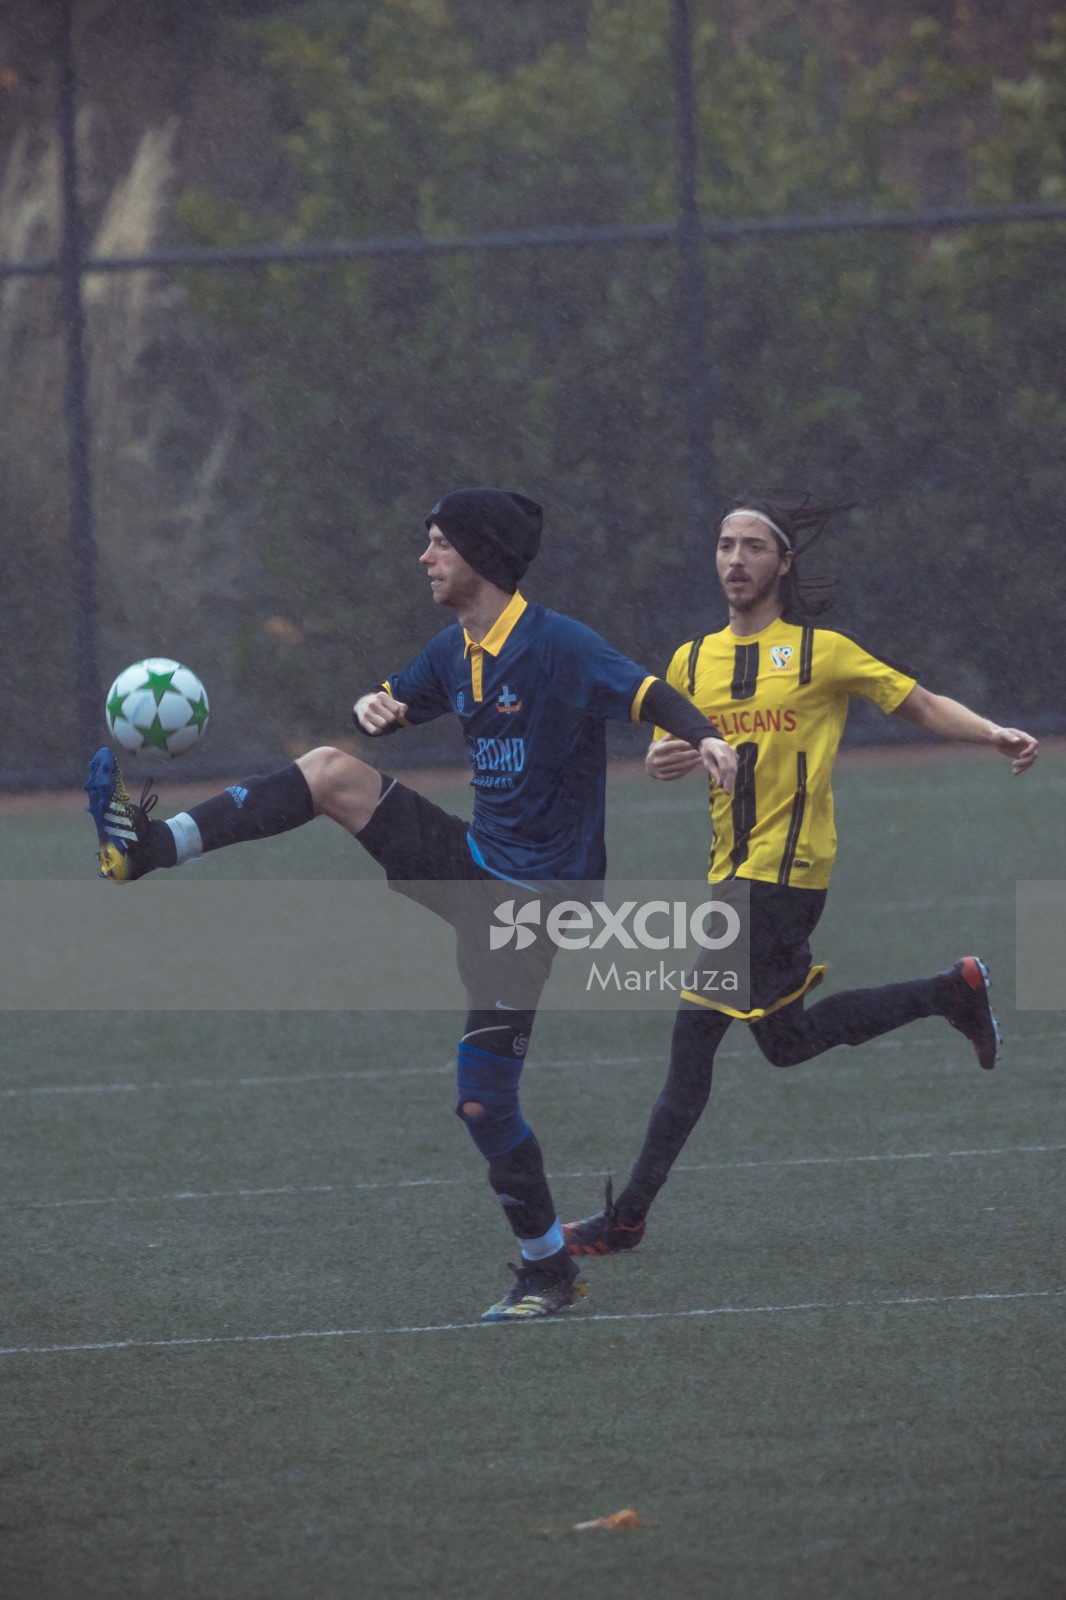 Player in beanie cap lifting ball with his foot - Sports Zone sunday league